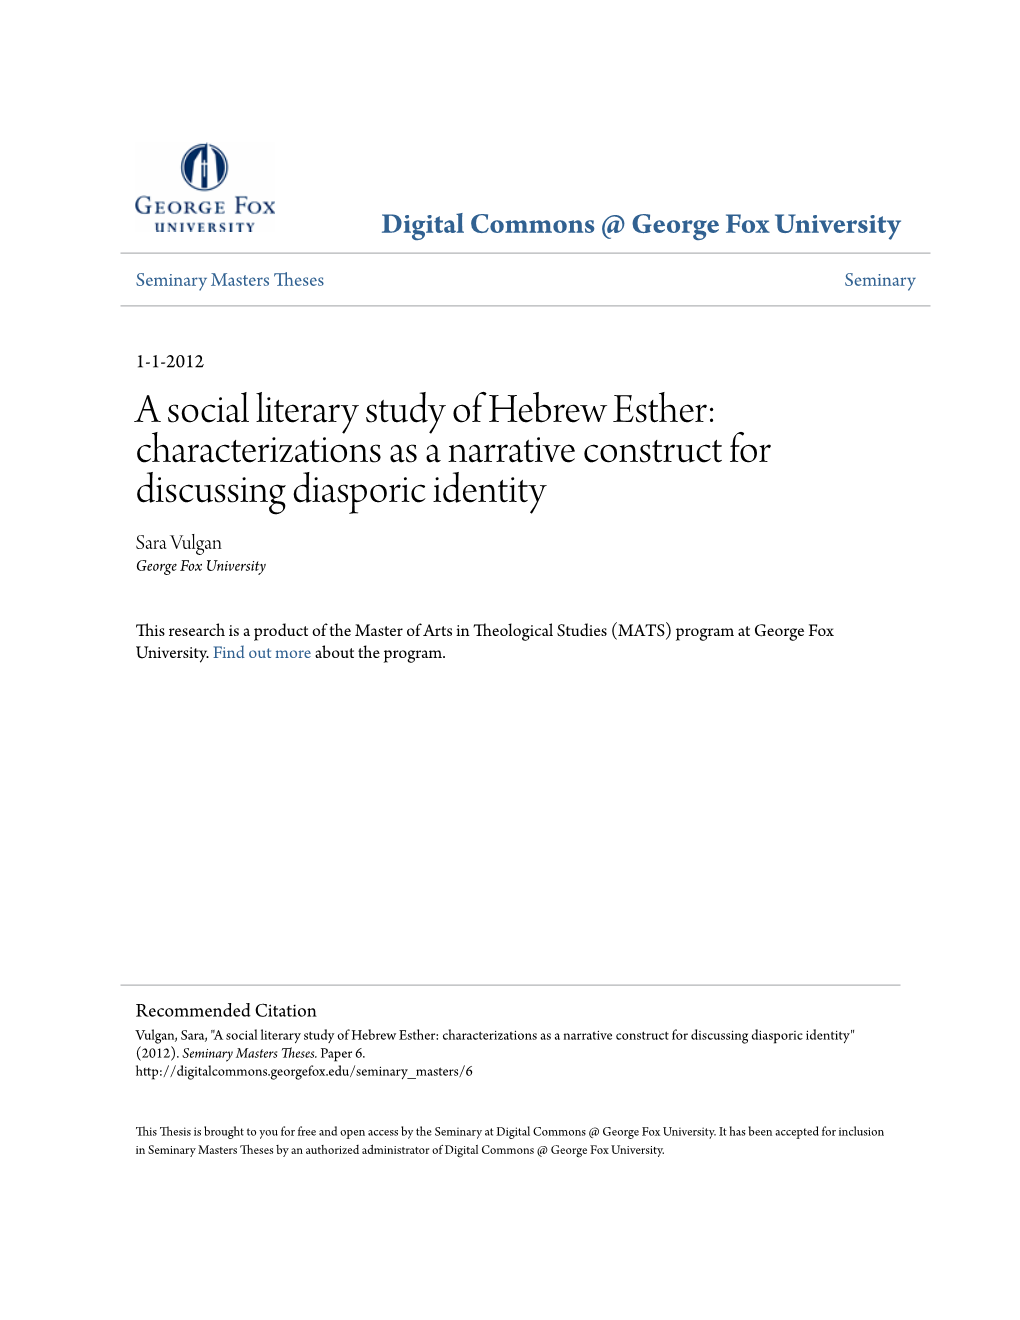 A Social Literary Study of Hebrew Esther: Characterizations As a Narrative Construct for Discussing Diasporic Identity Sara Vulgan George Fox University